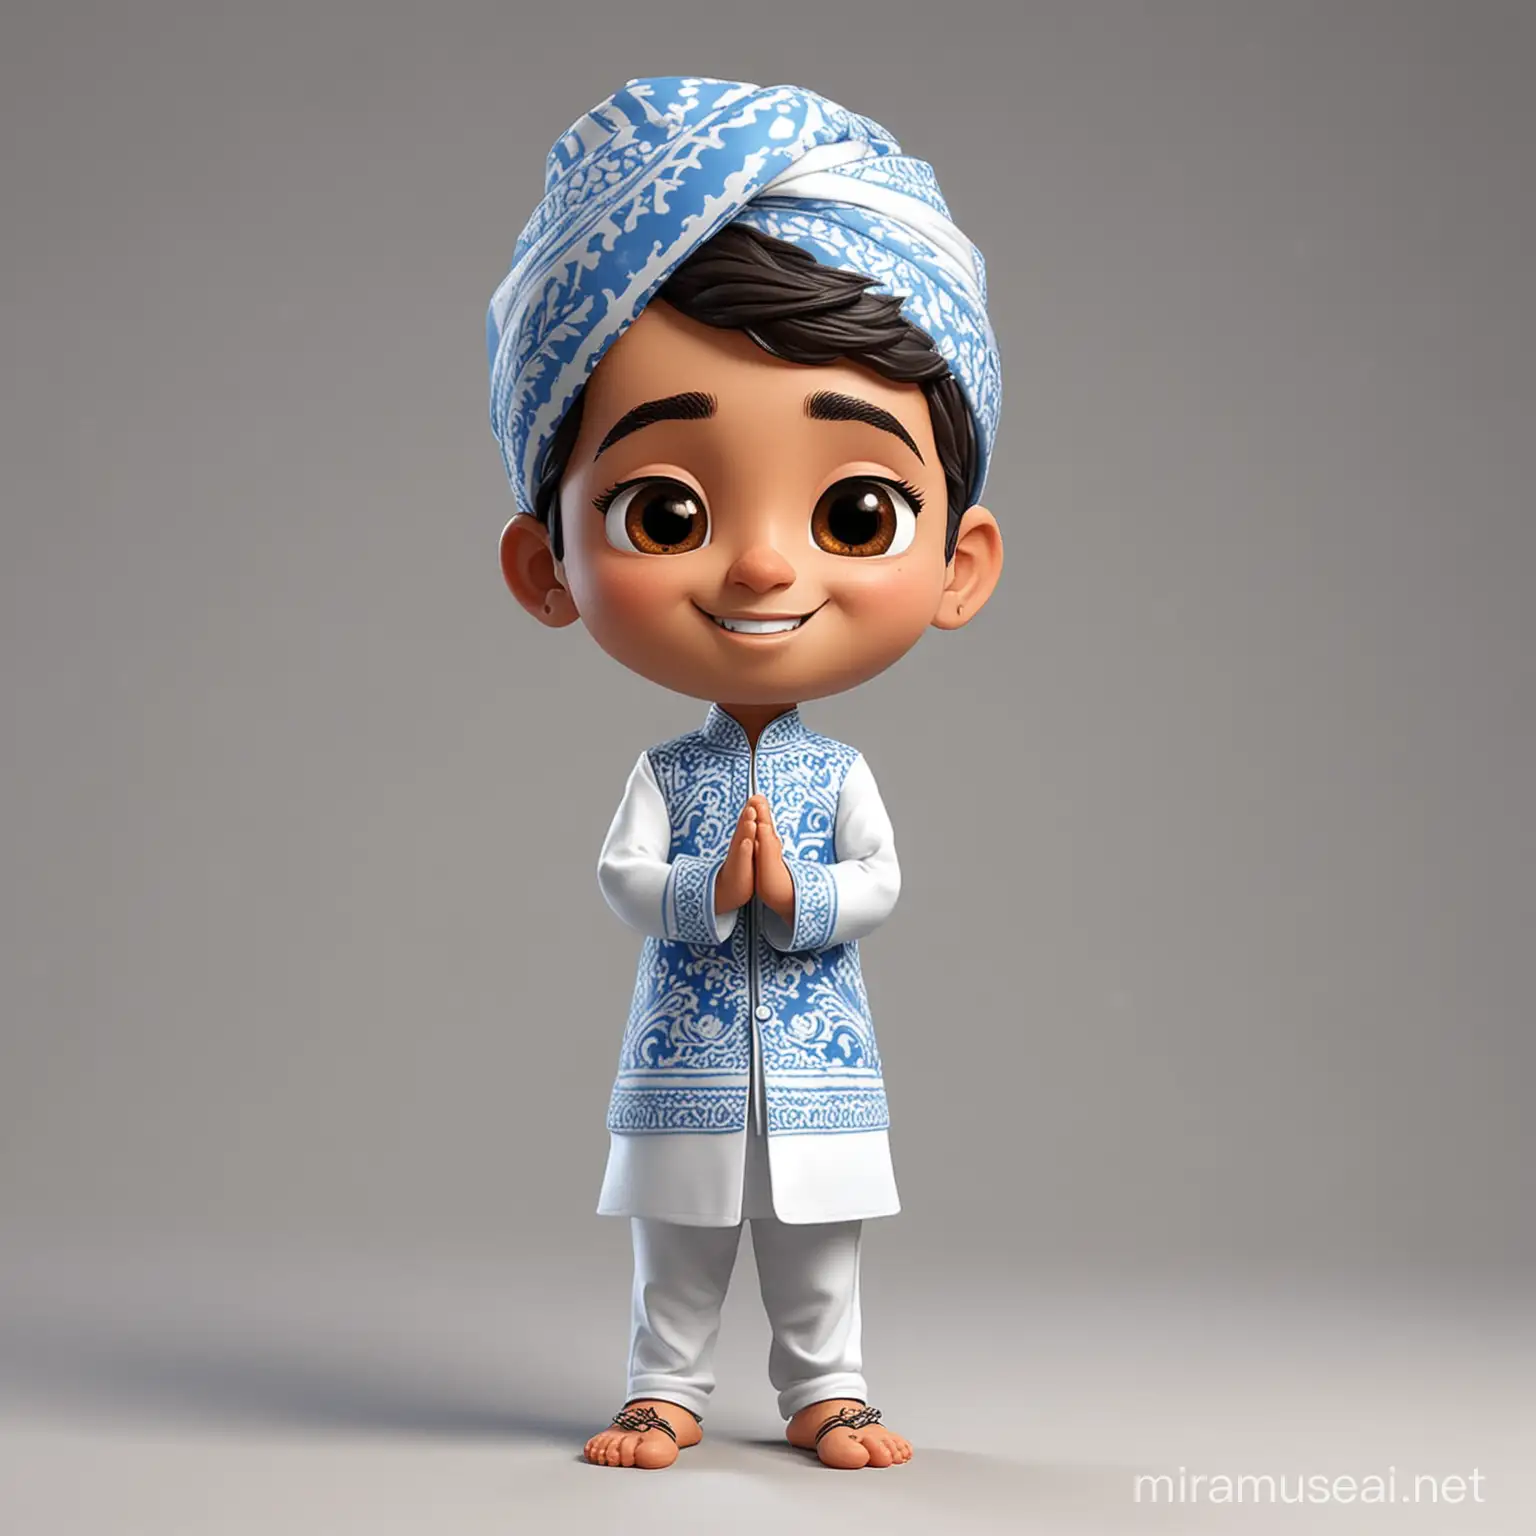 create a caricature of a teenage boy standing with Folding Hands(Namaste) doing greetings in blue and white kurta payjama